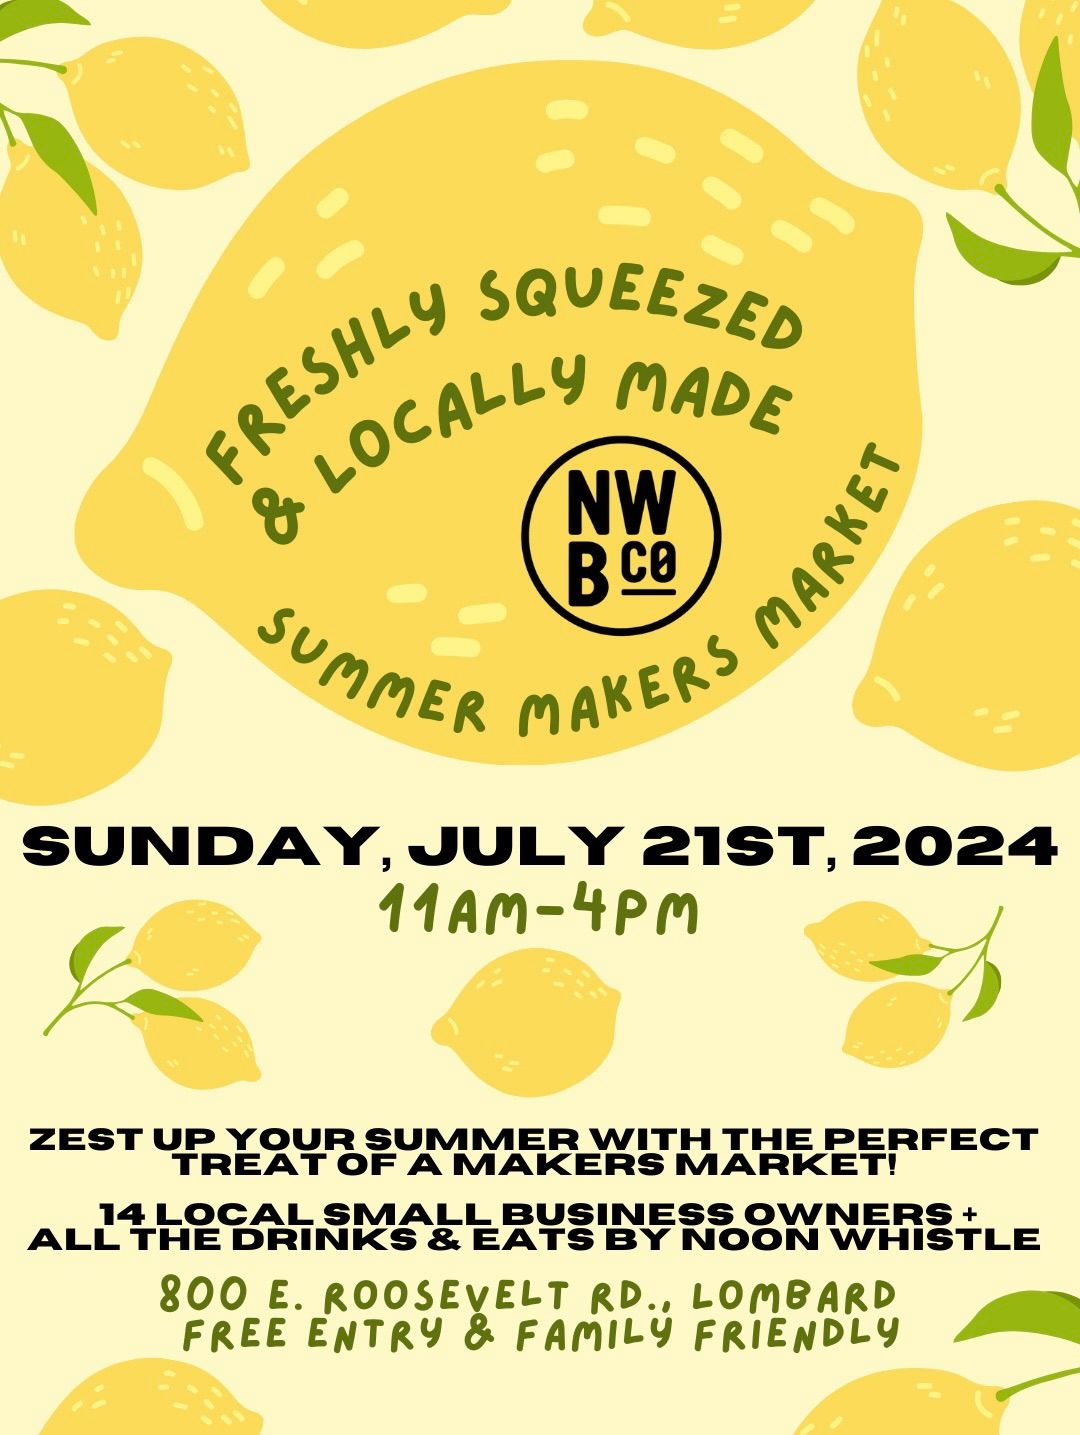 Freshly Squeezed & Locally Made \ud83c\udf4b: Summer Makers Market